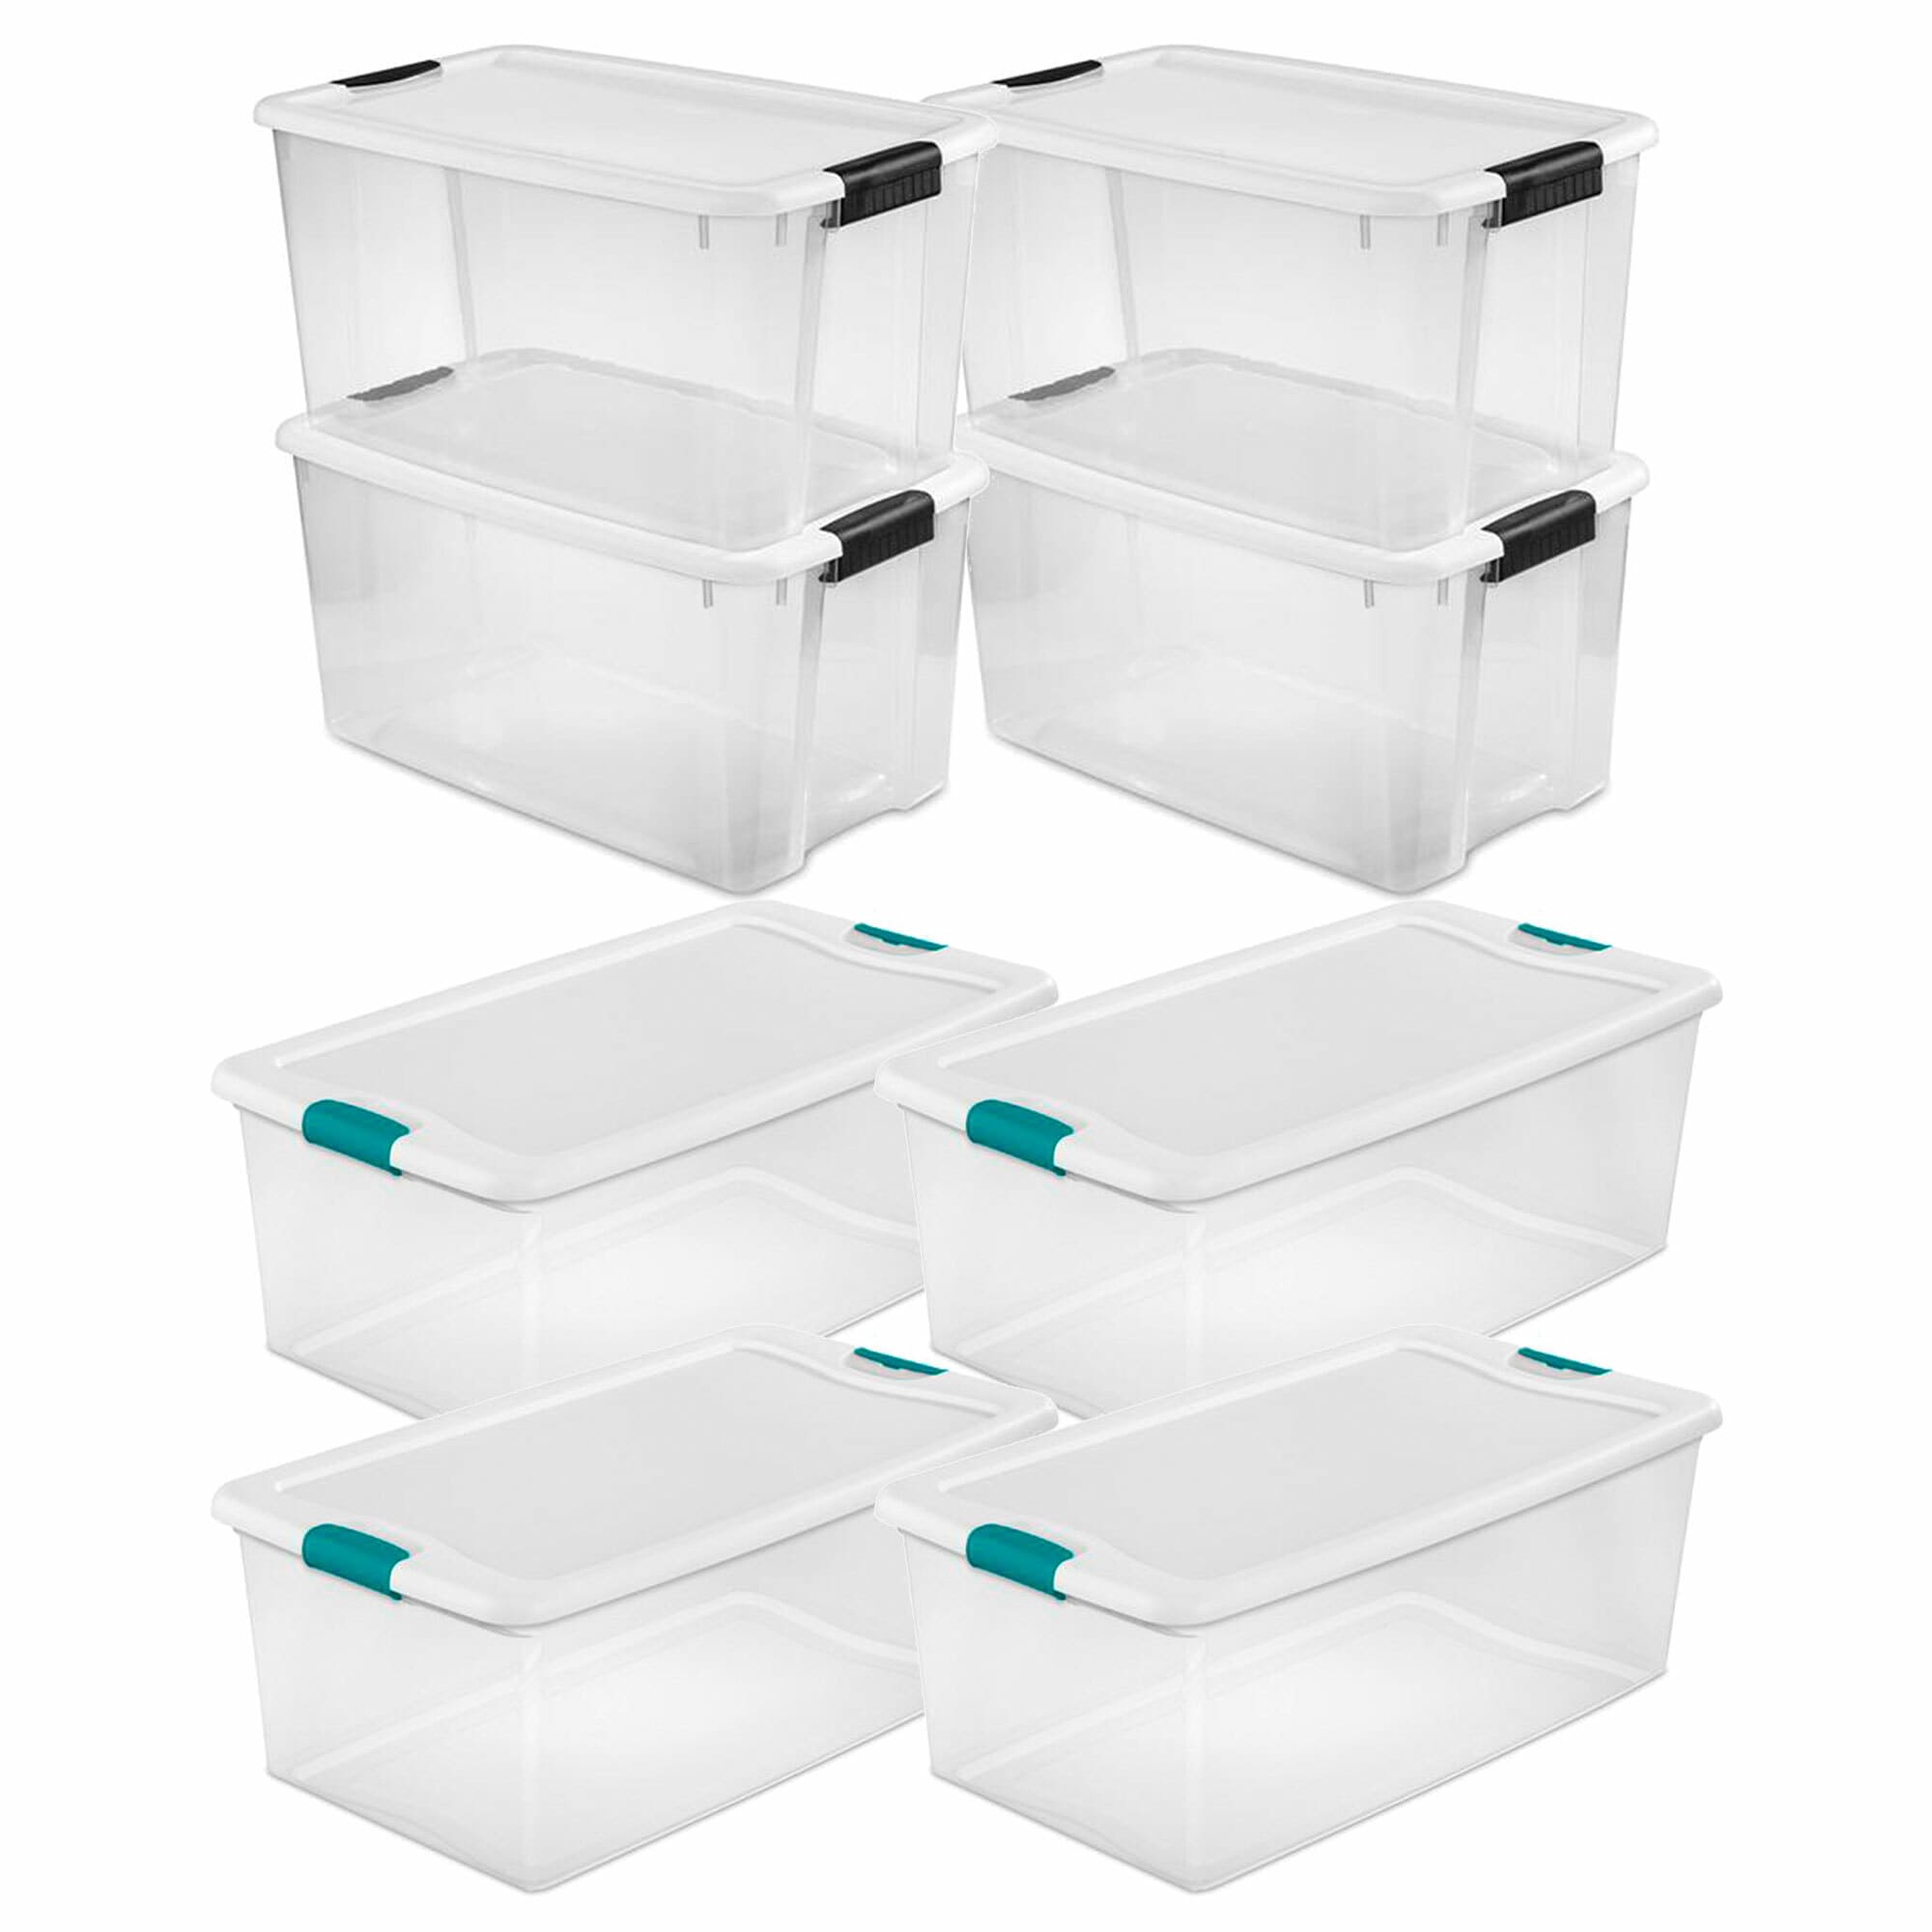 8 Plastic Food Storage Containers, Little Big Box